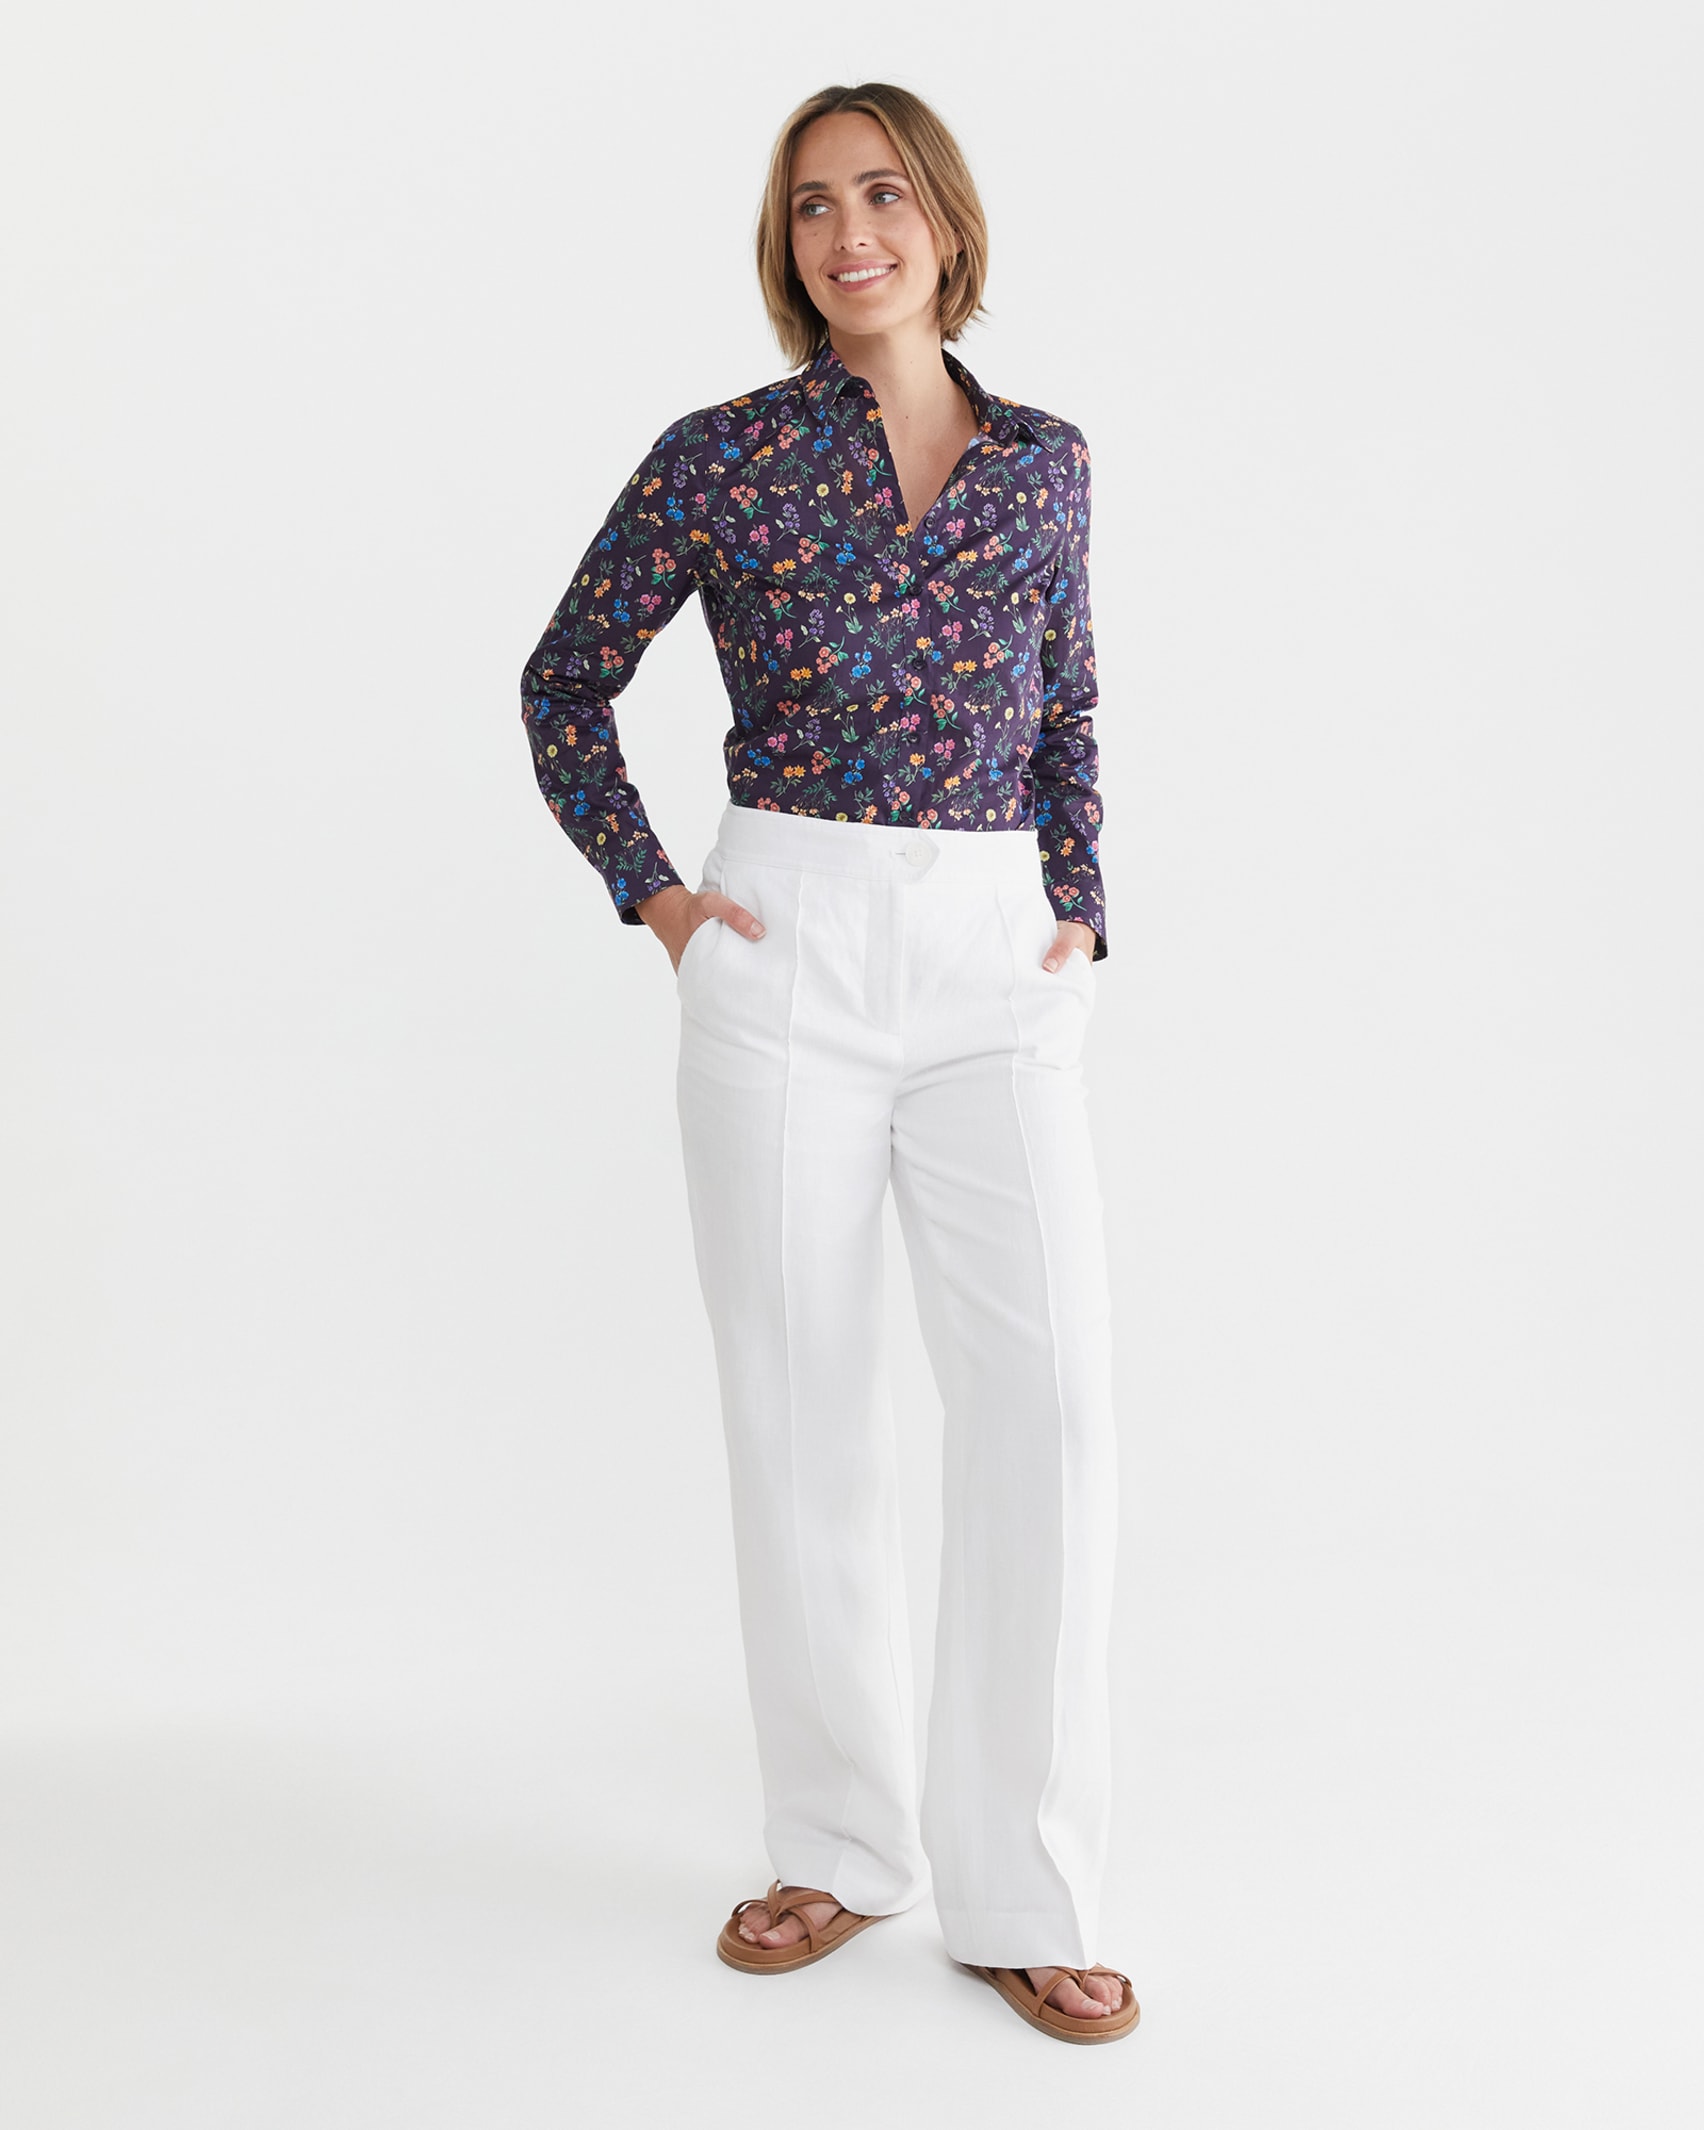 Annie Liberty Shirt in NAVY MULTI